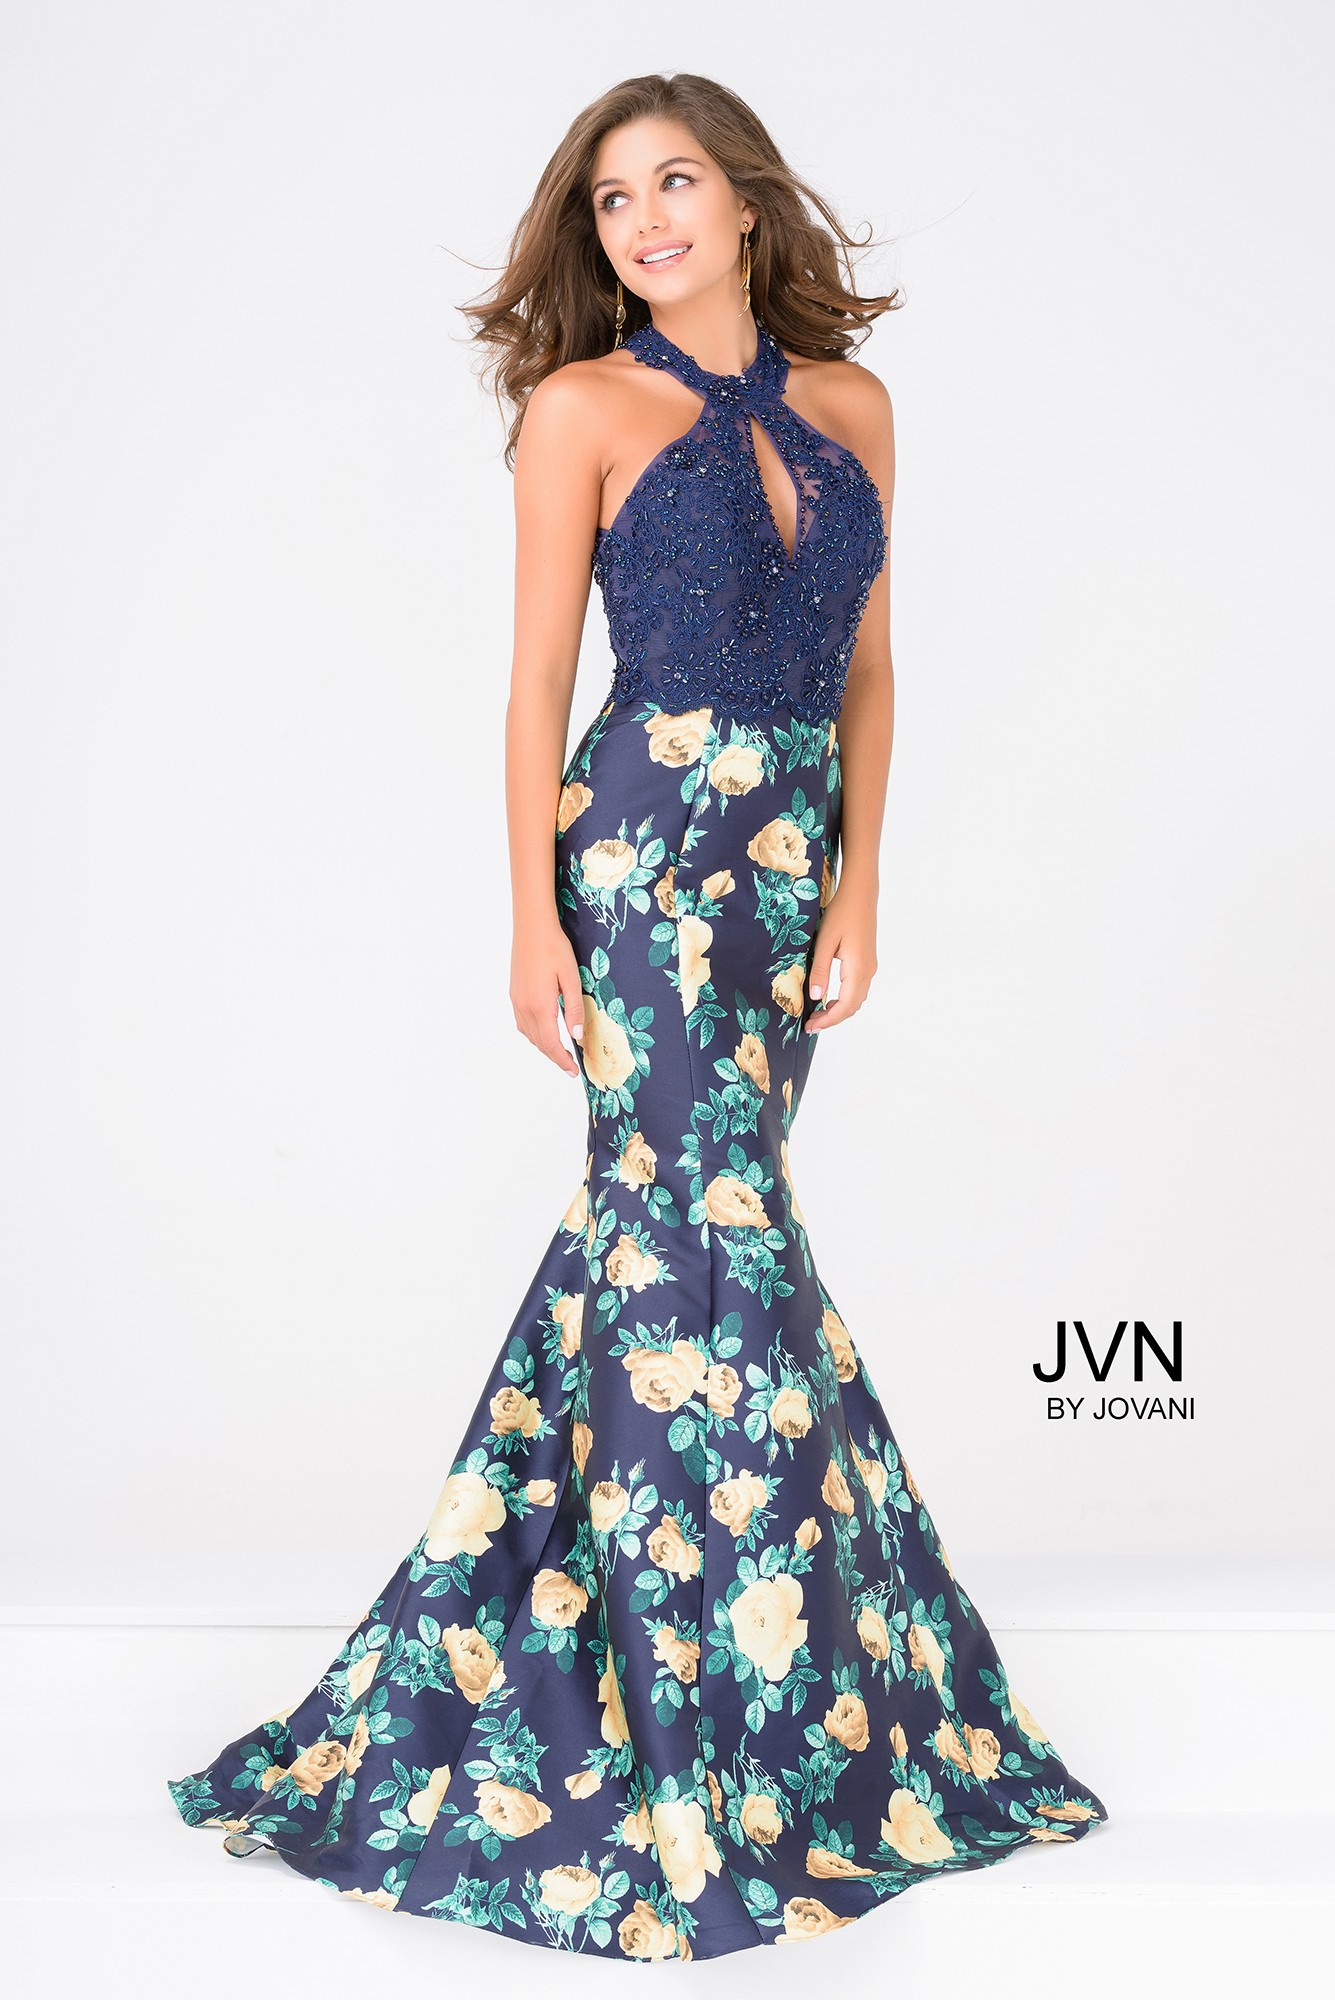 JVN by Jovani JVN47610 Floral Mermaid Gown with Lace Halter Top